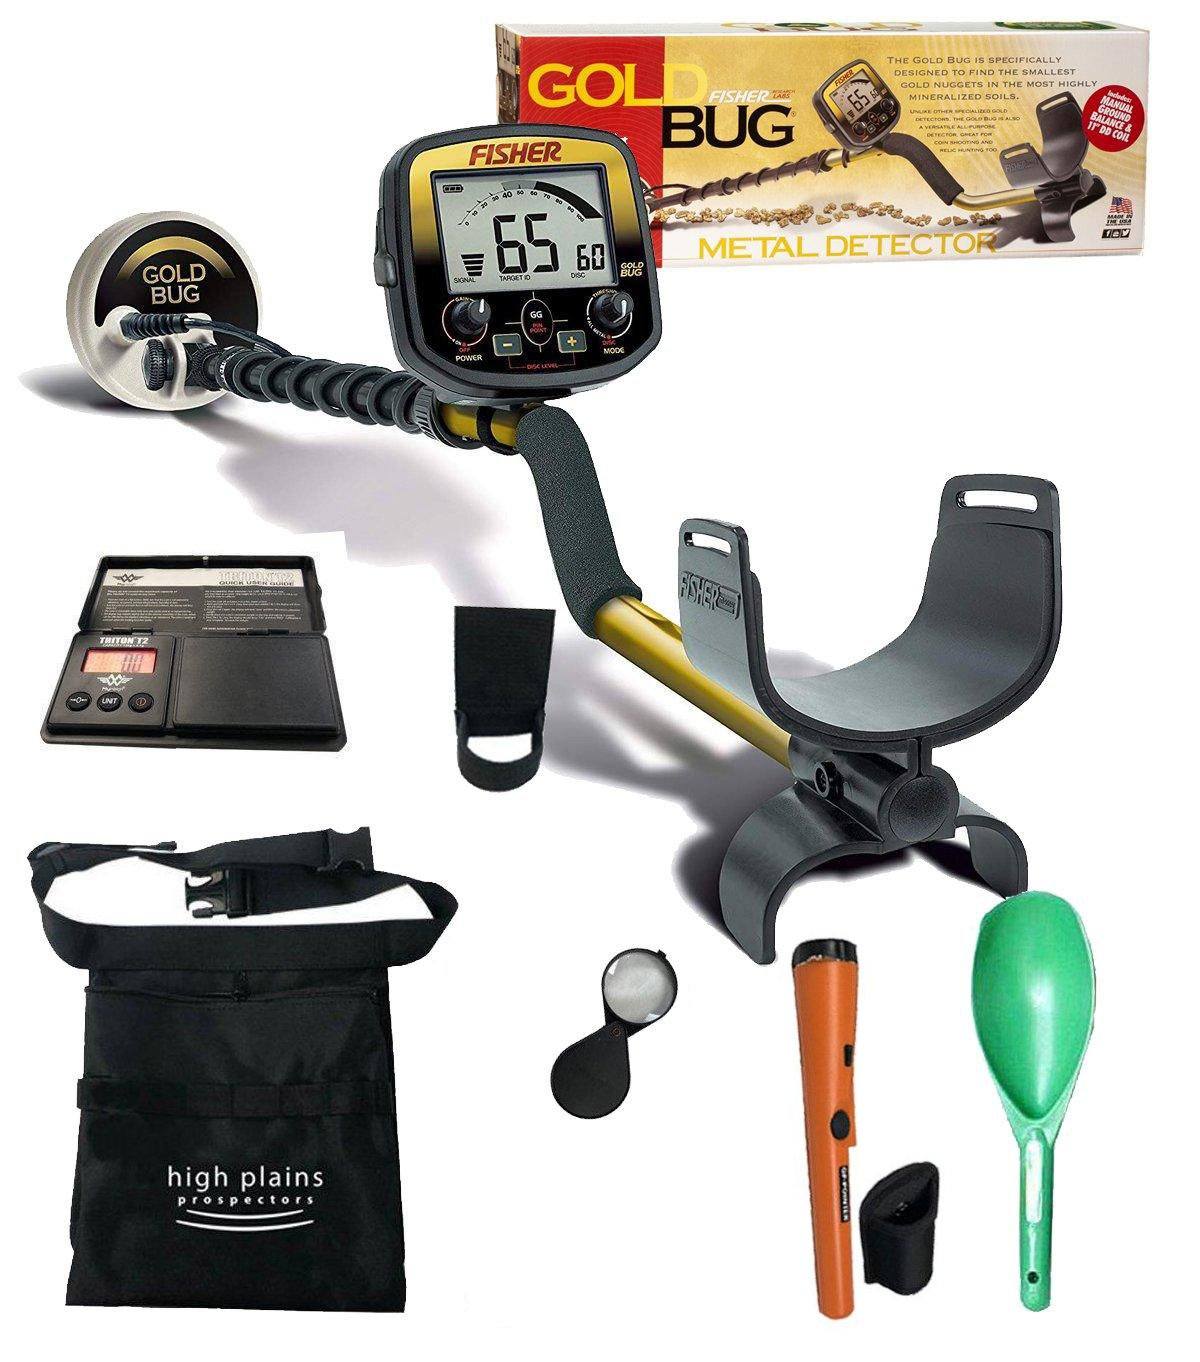 Fisher Gold Bug Metal Detector Bundle with Free GP Pointer Free Gear